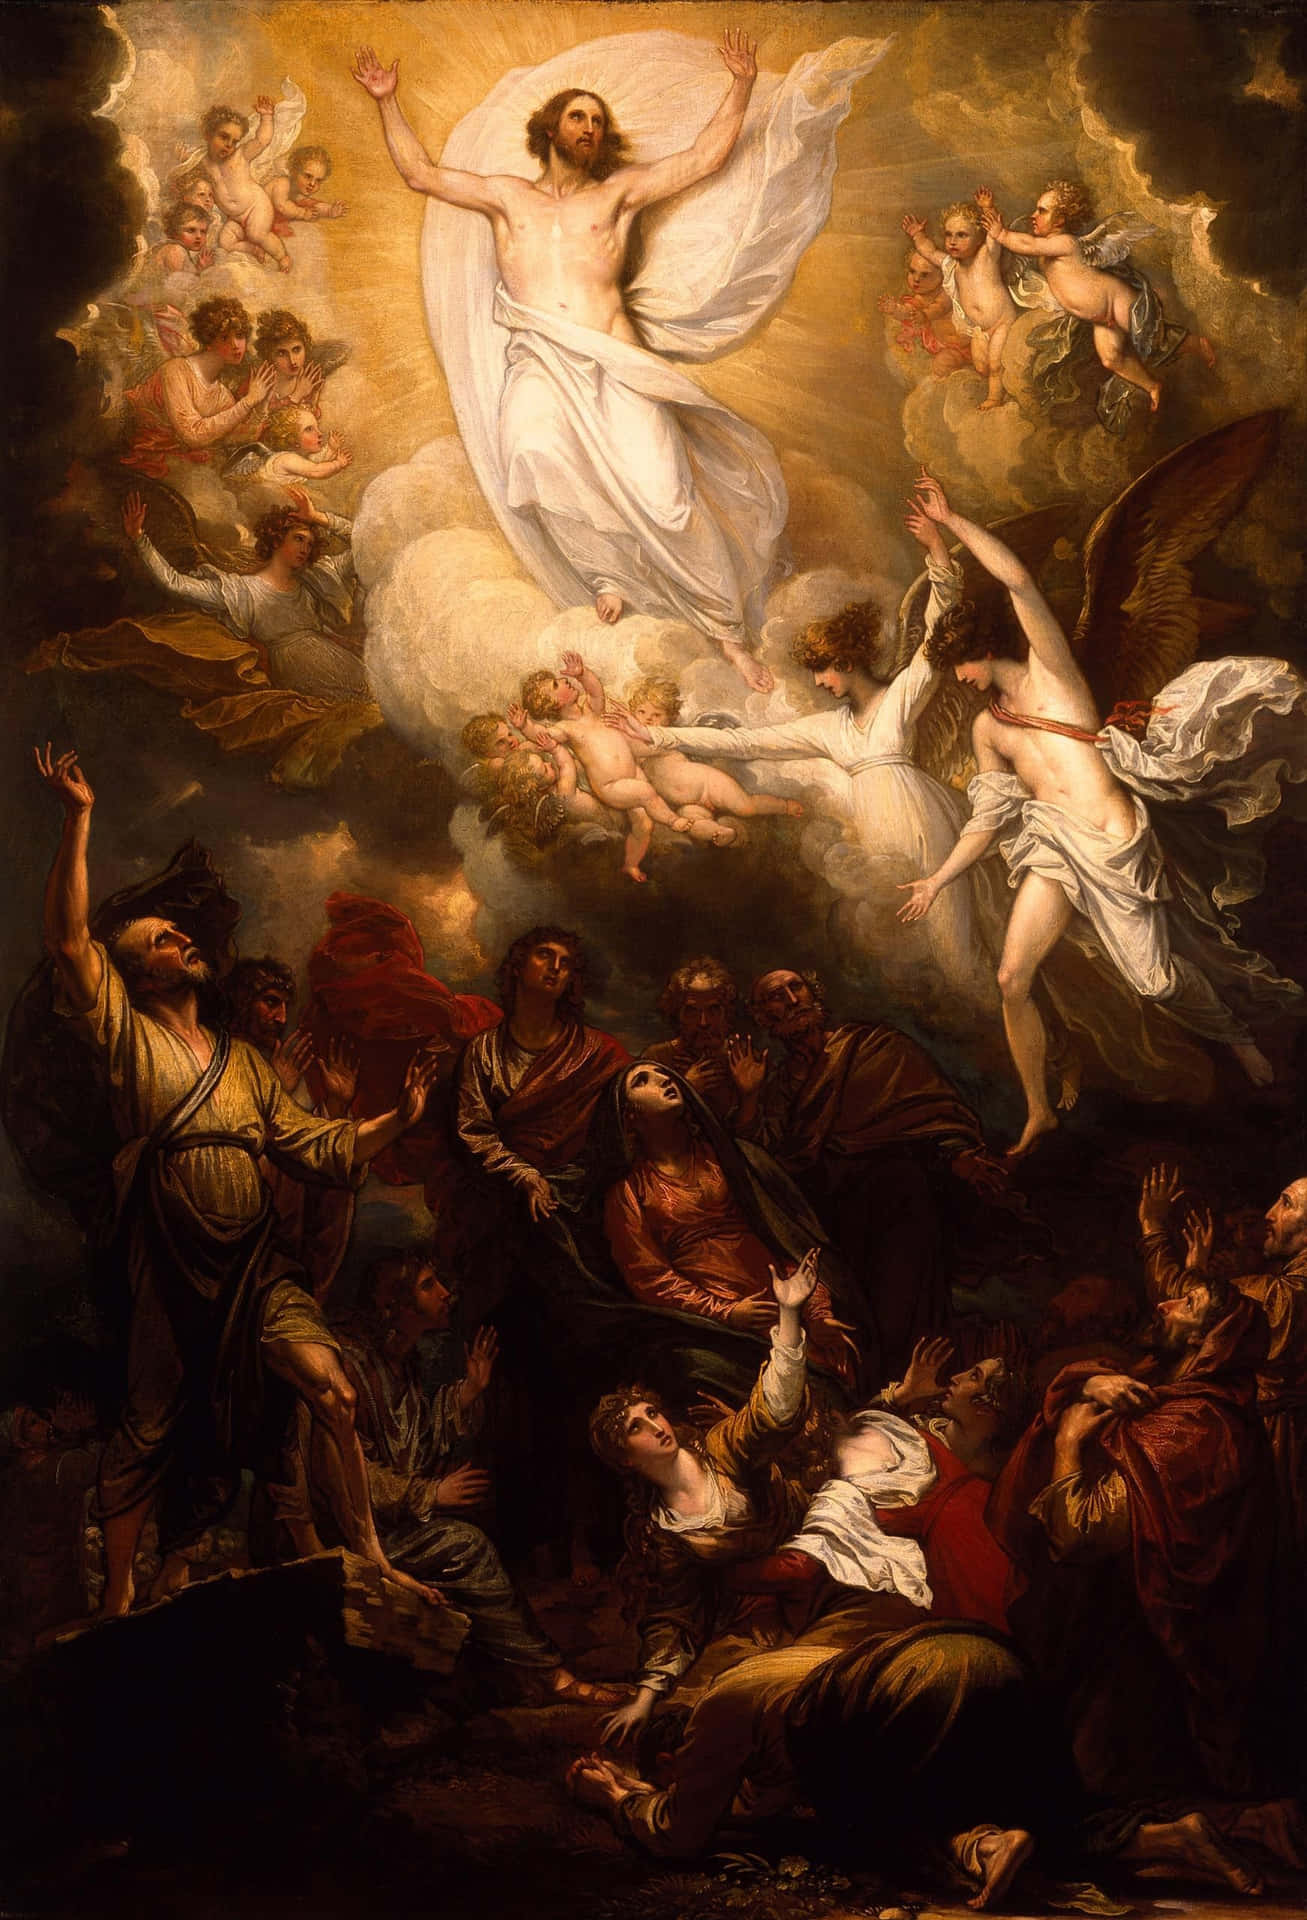 Caption: Jesus Resurrection - The Triumph of Light and Life over Darkness and Death Wallpaper